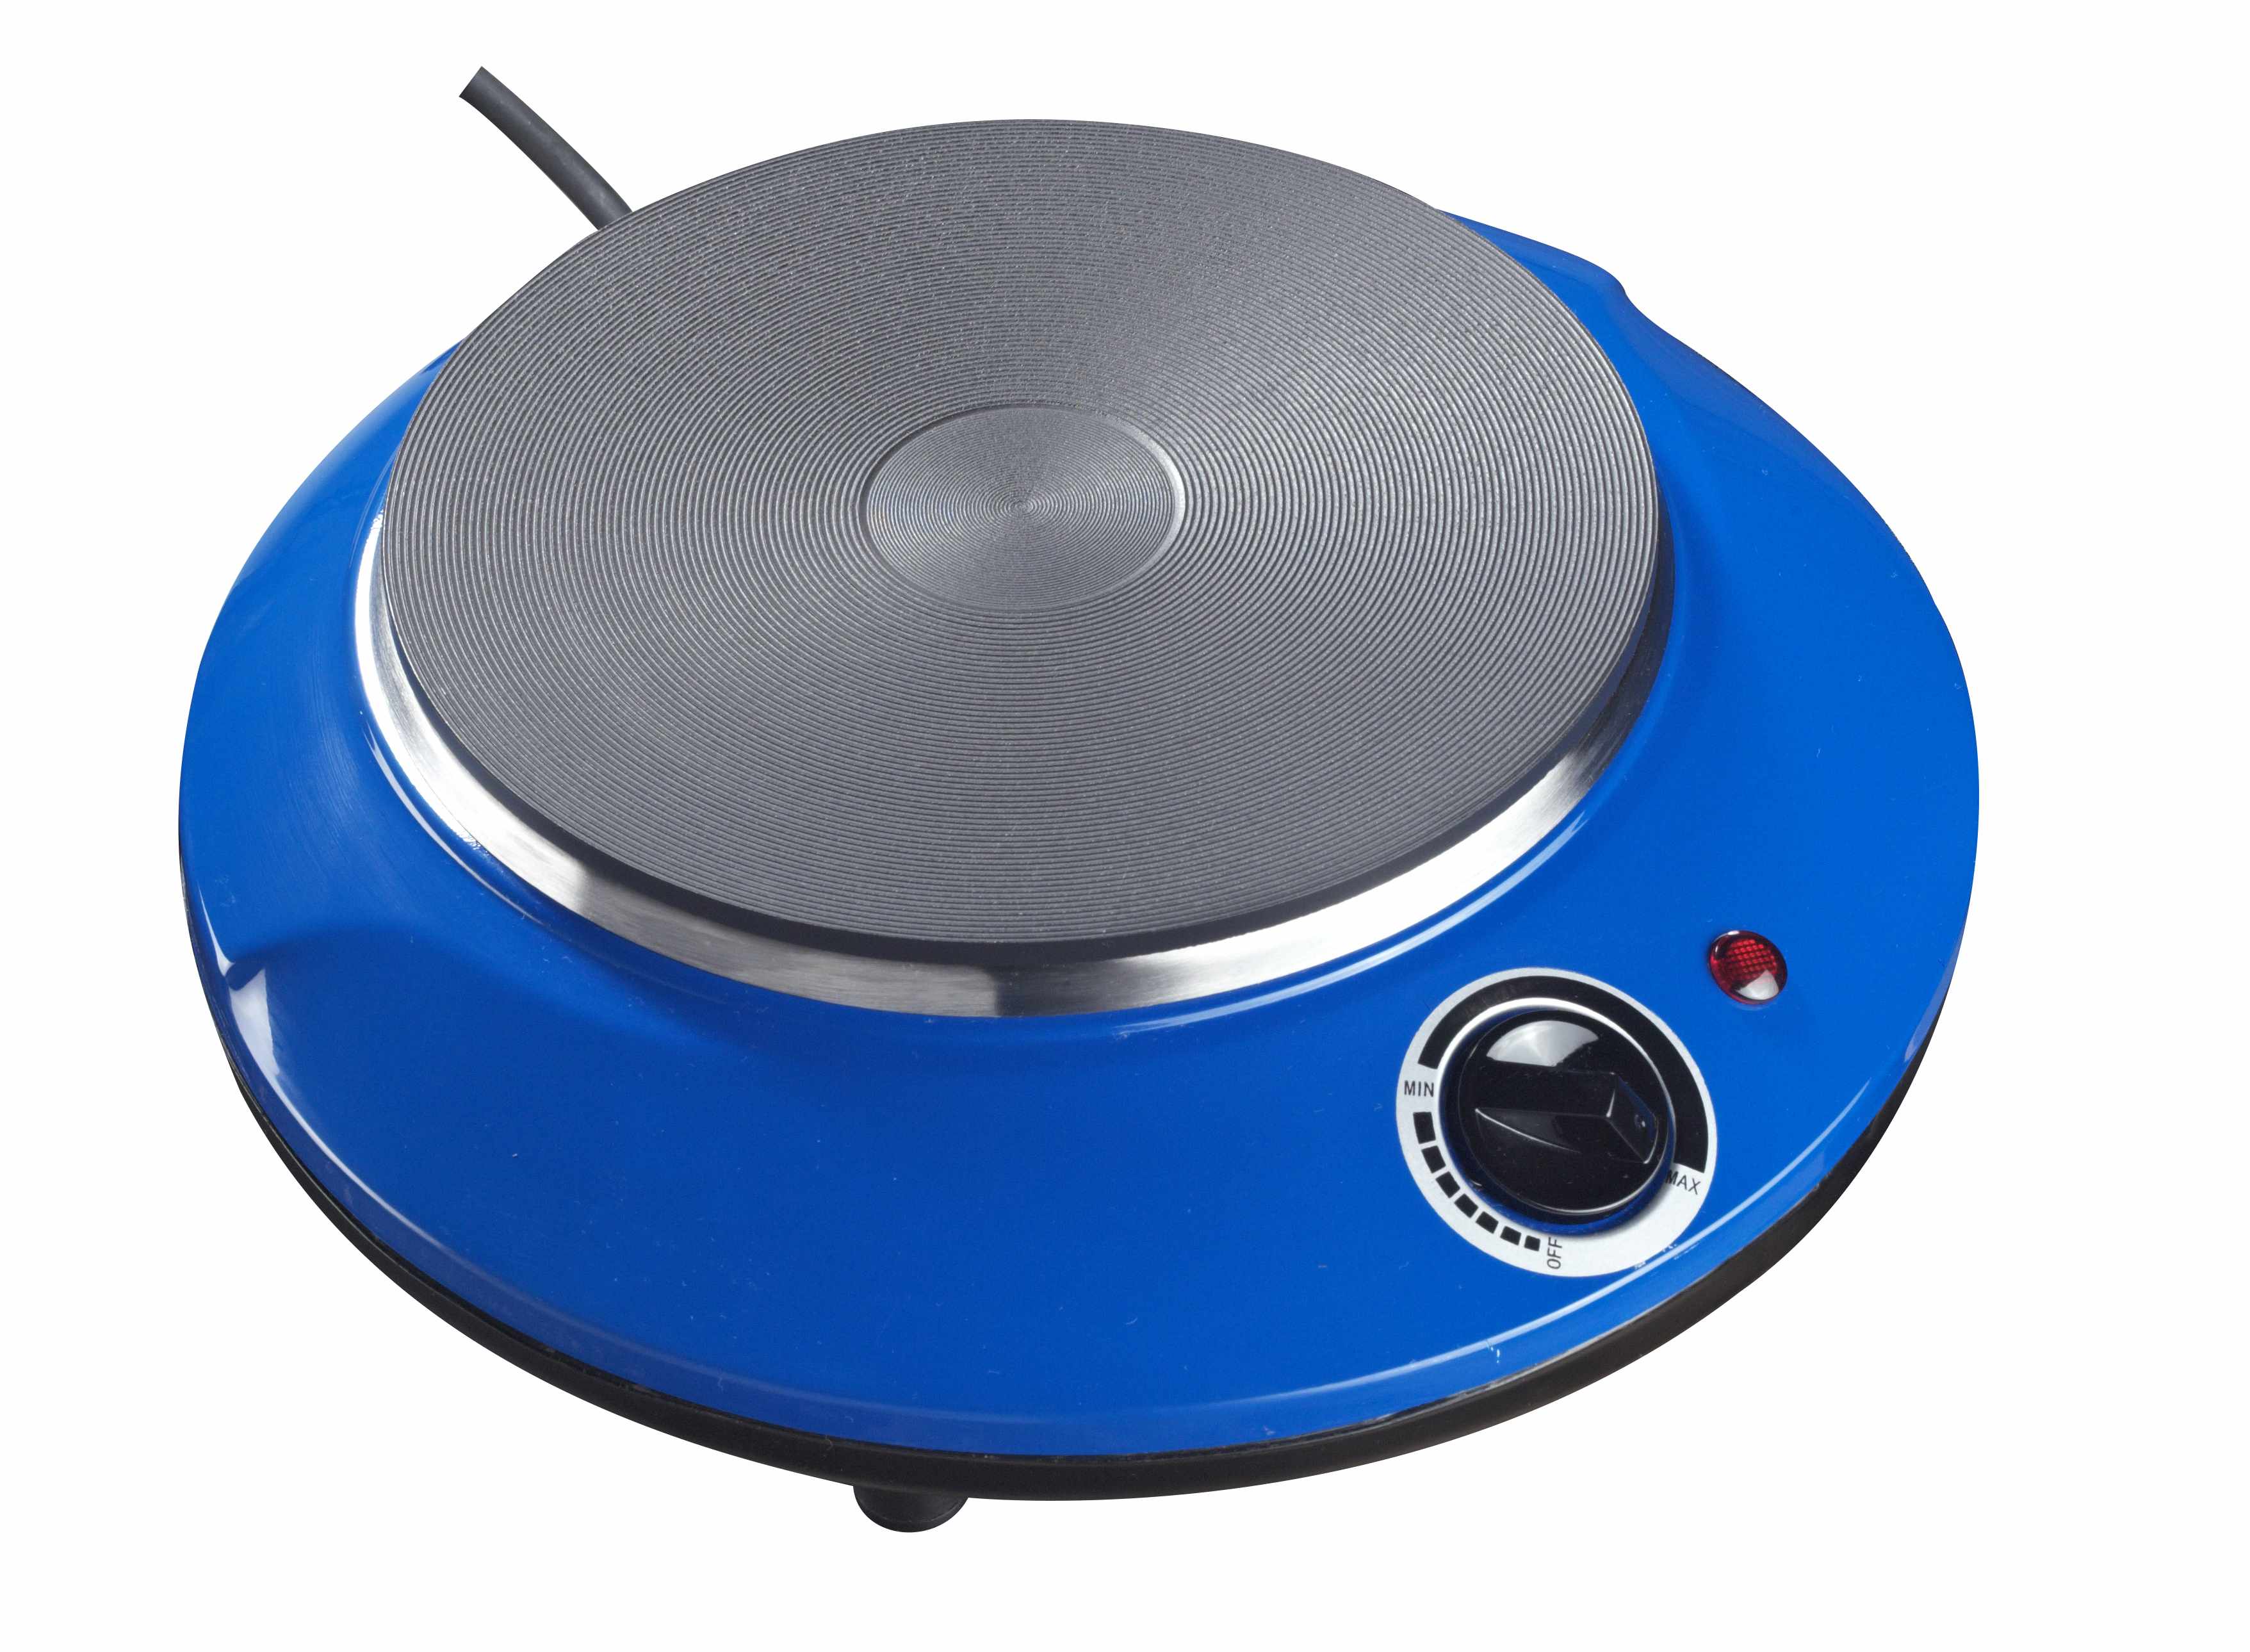 Mini travel hot plate with one cast iron burner